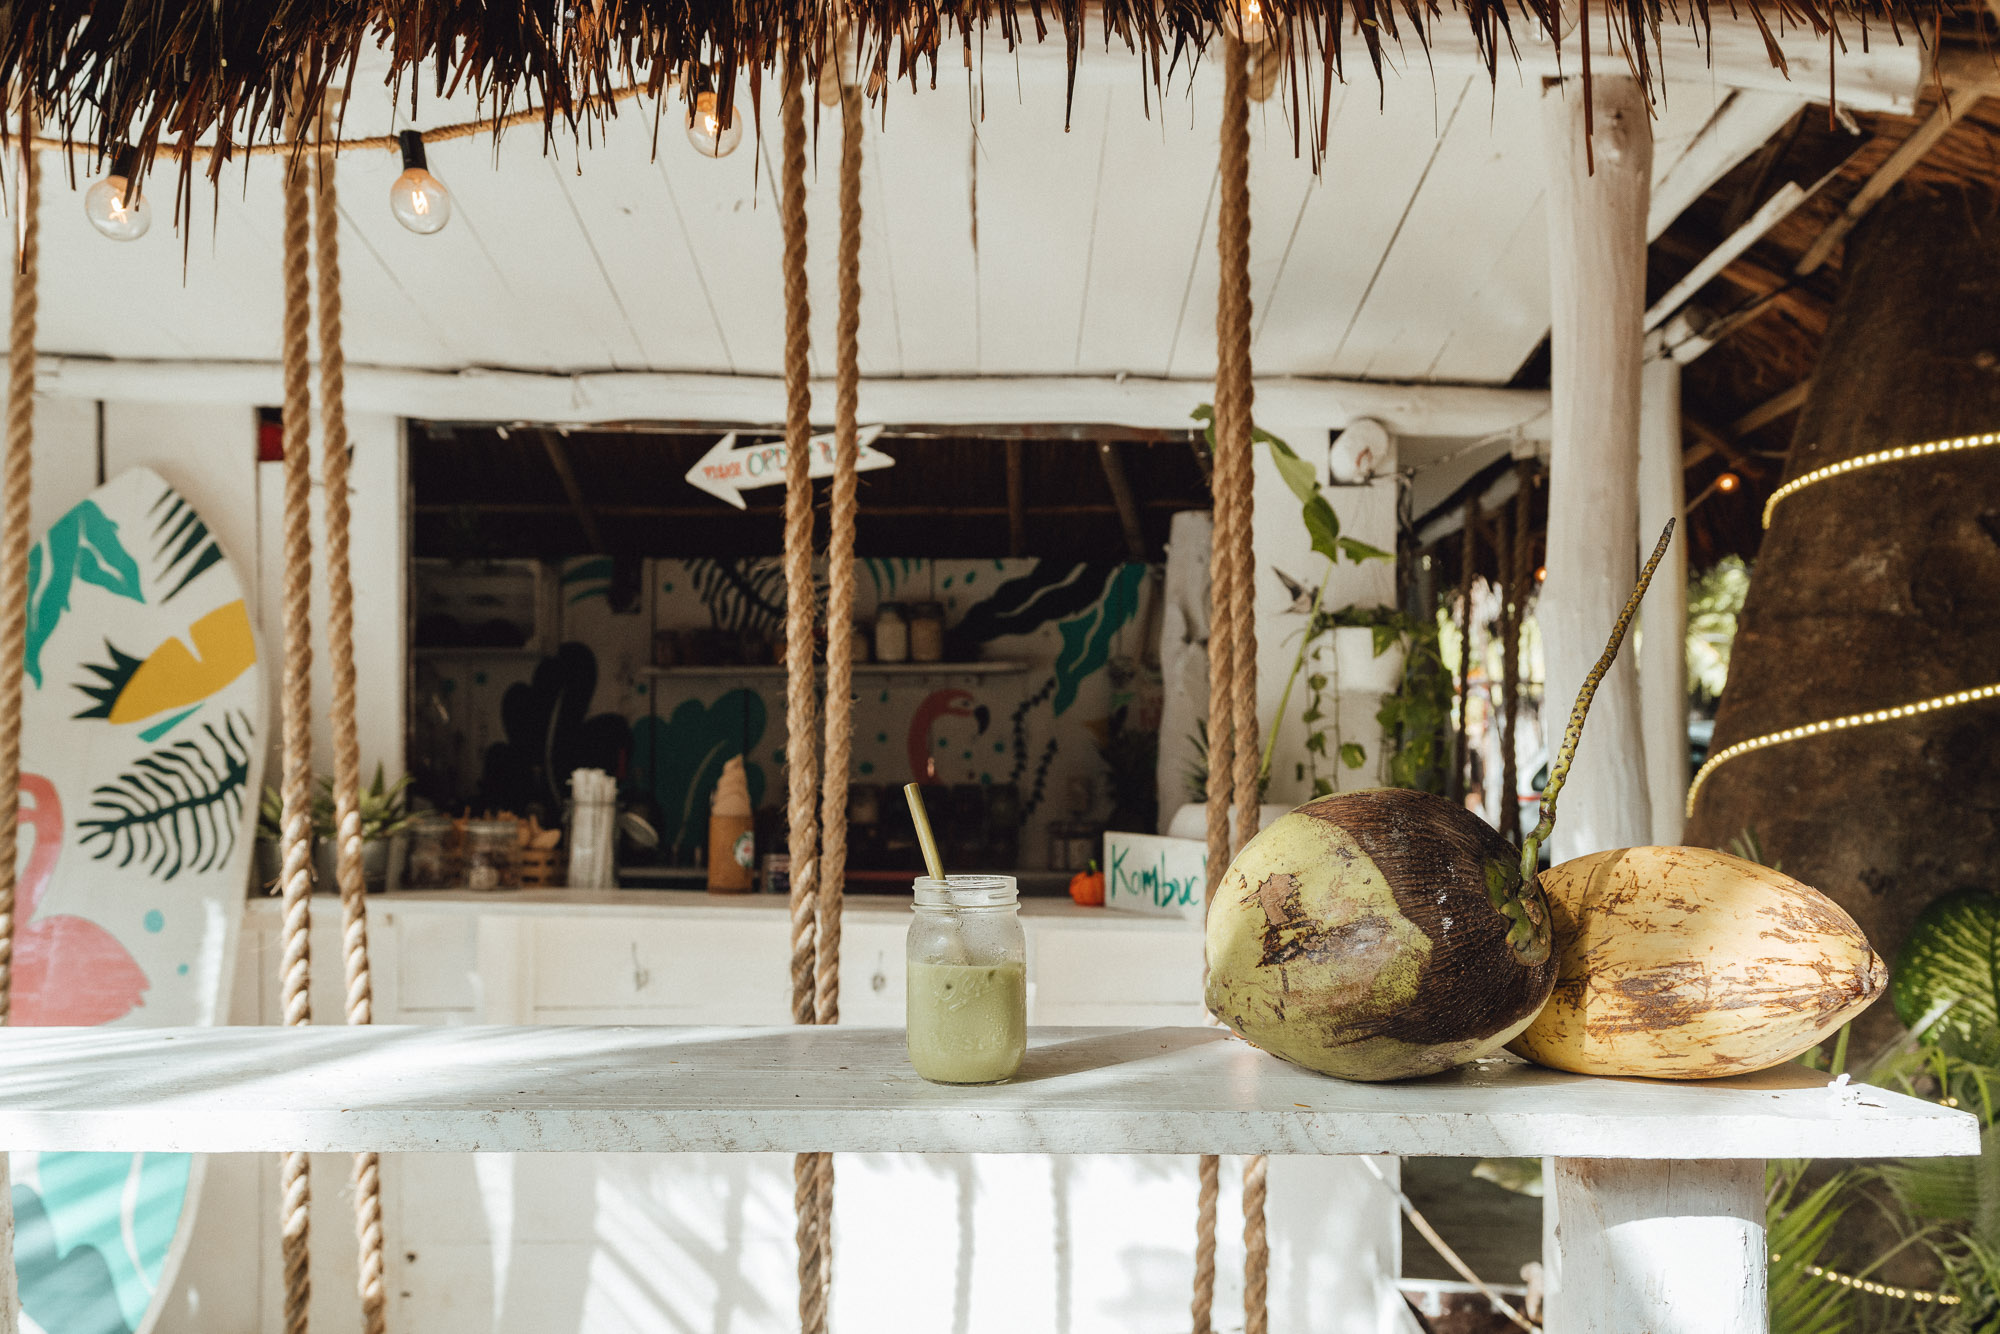 Matcha Mama in Tulum Quintana Roo Mexico via Find Us Lost